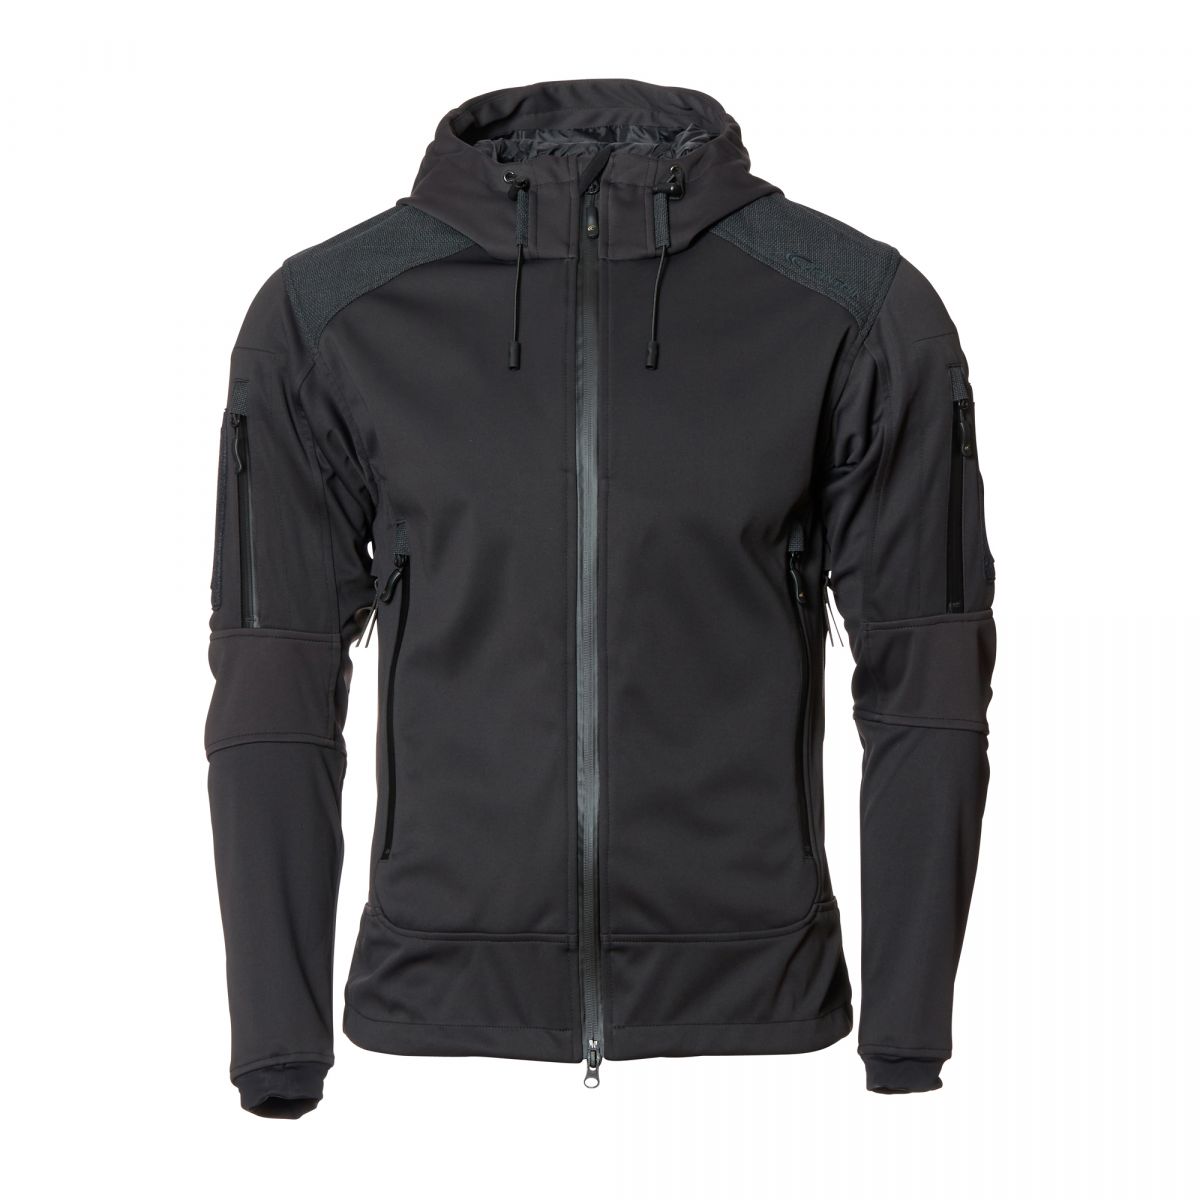 CARINTHIA SOFTSHELL JACKET SPECIAL FORCES- BLACK front